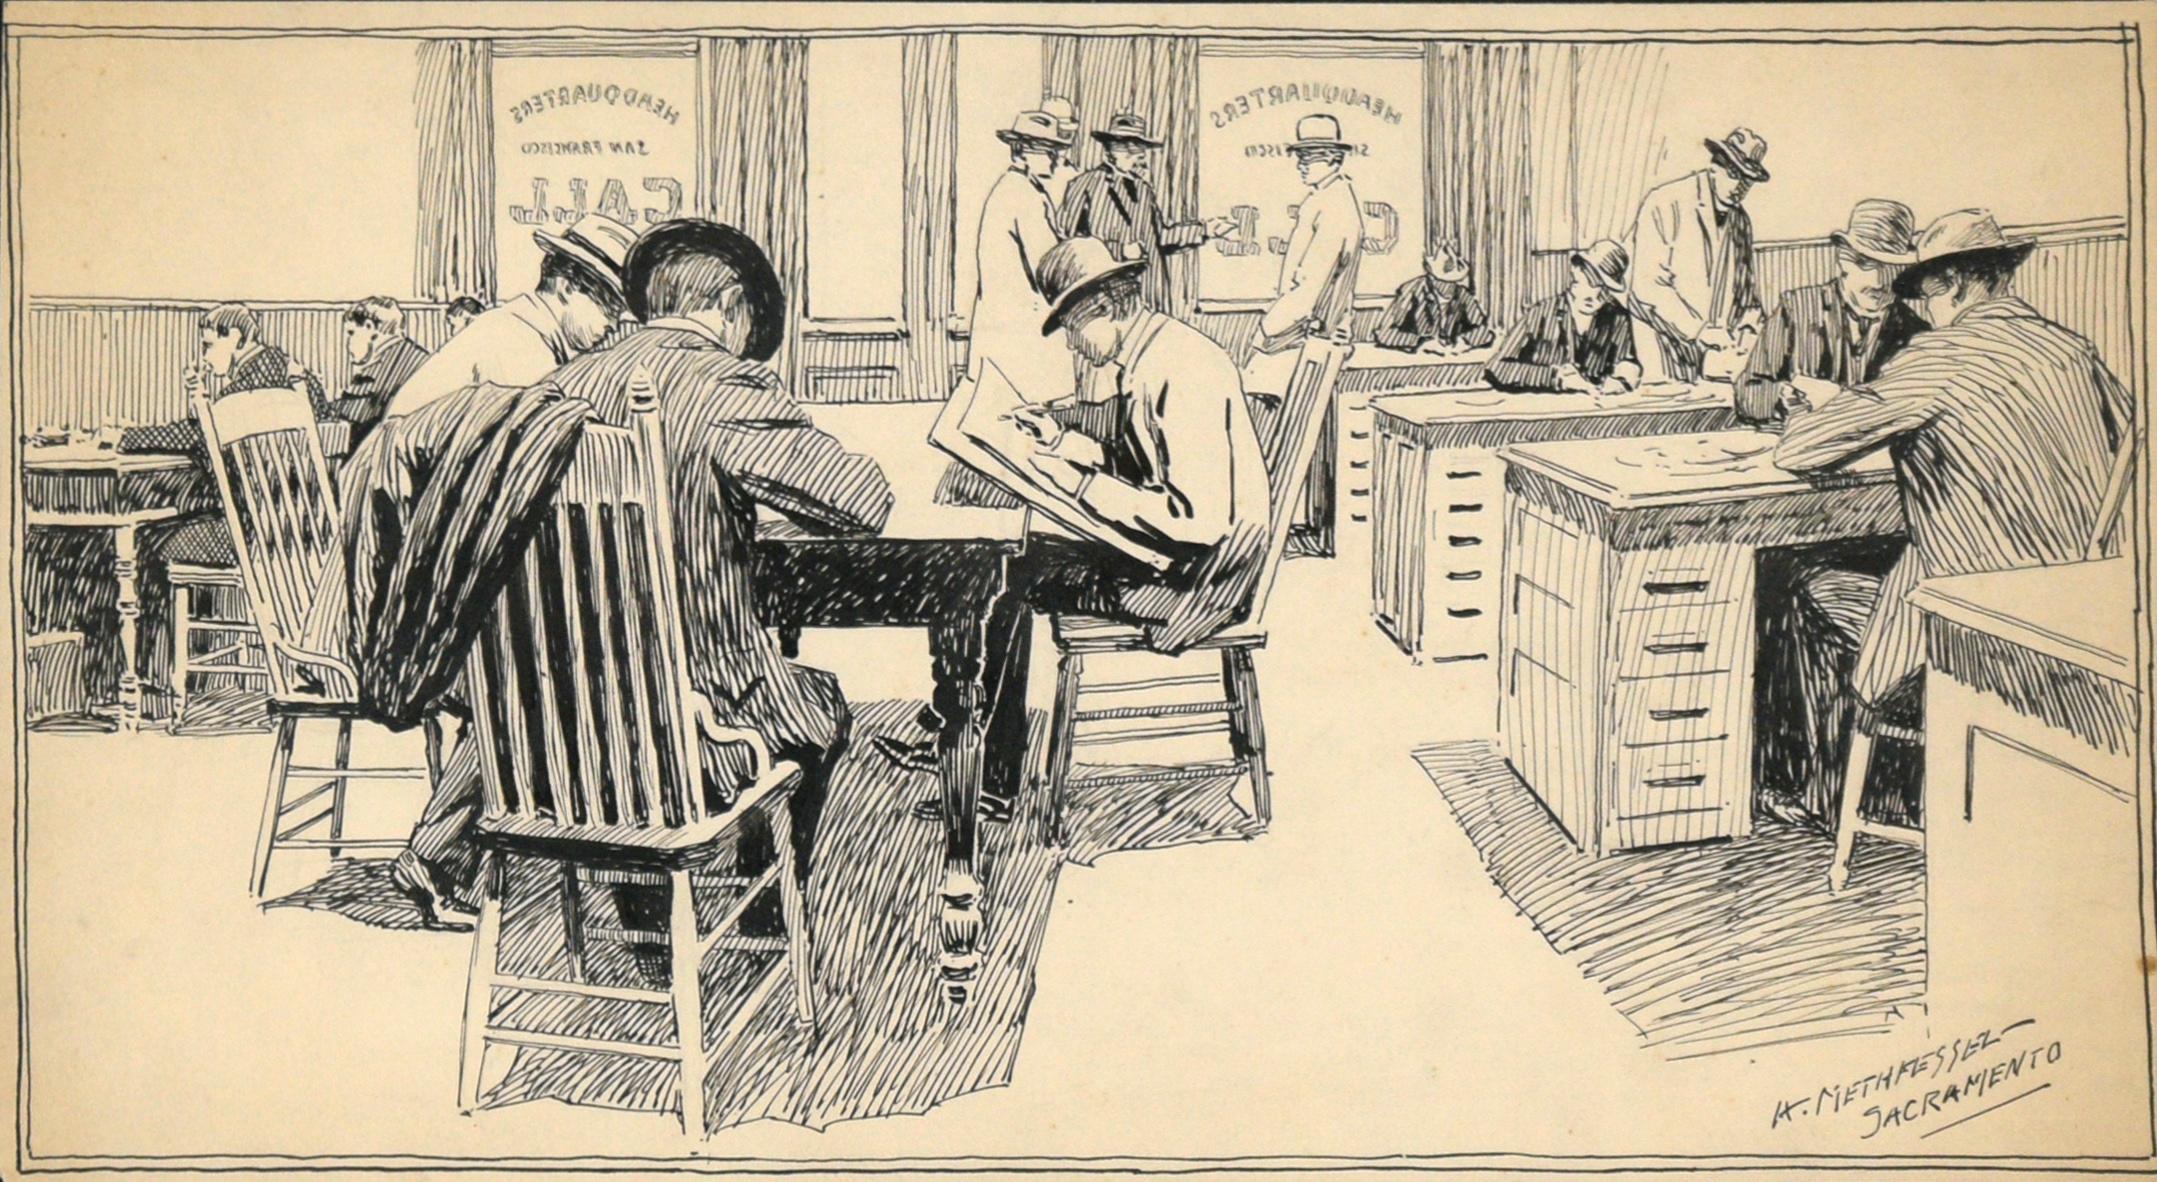 The Illustrator's Workroom at The San Francisco Call, Late 19th C. Illustration - Art by Adolph Methfessel